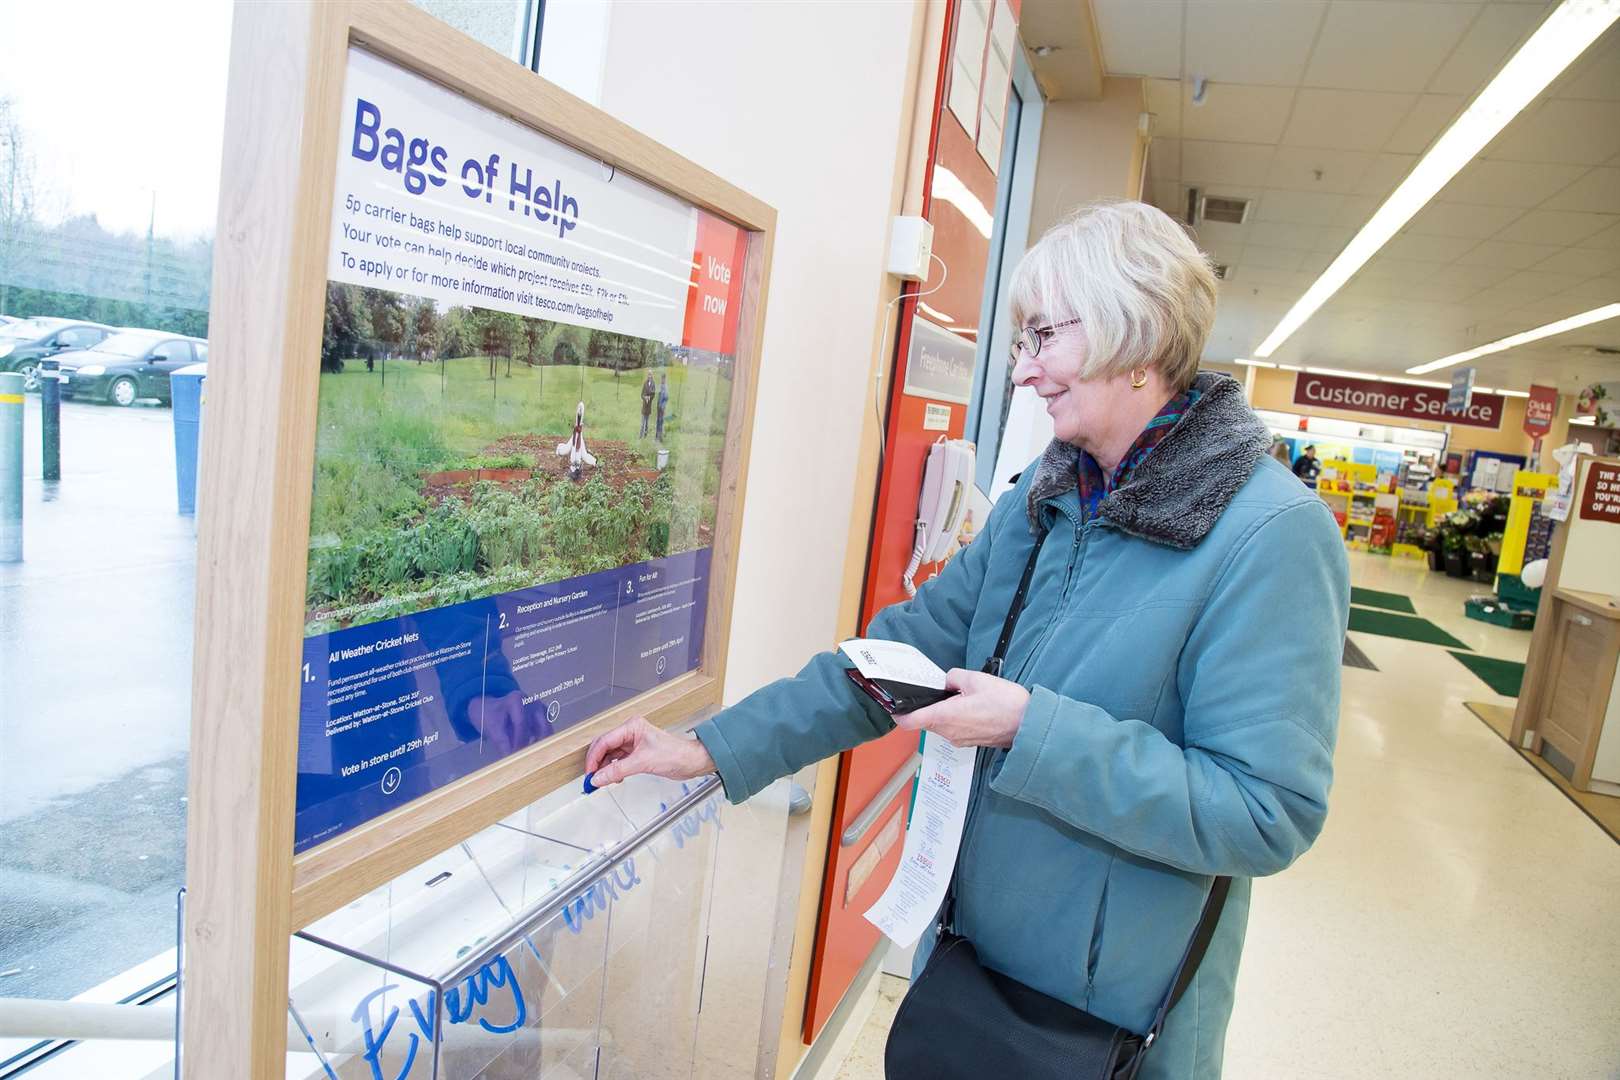 The Tesco Bags of Help Scheme is now open for new good causes